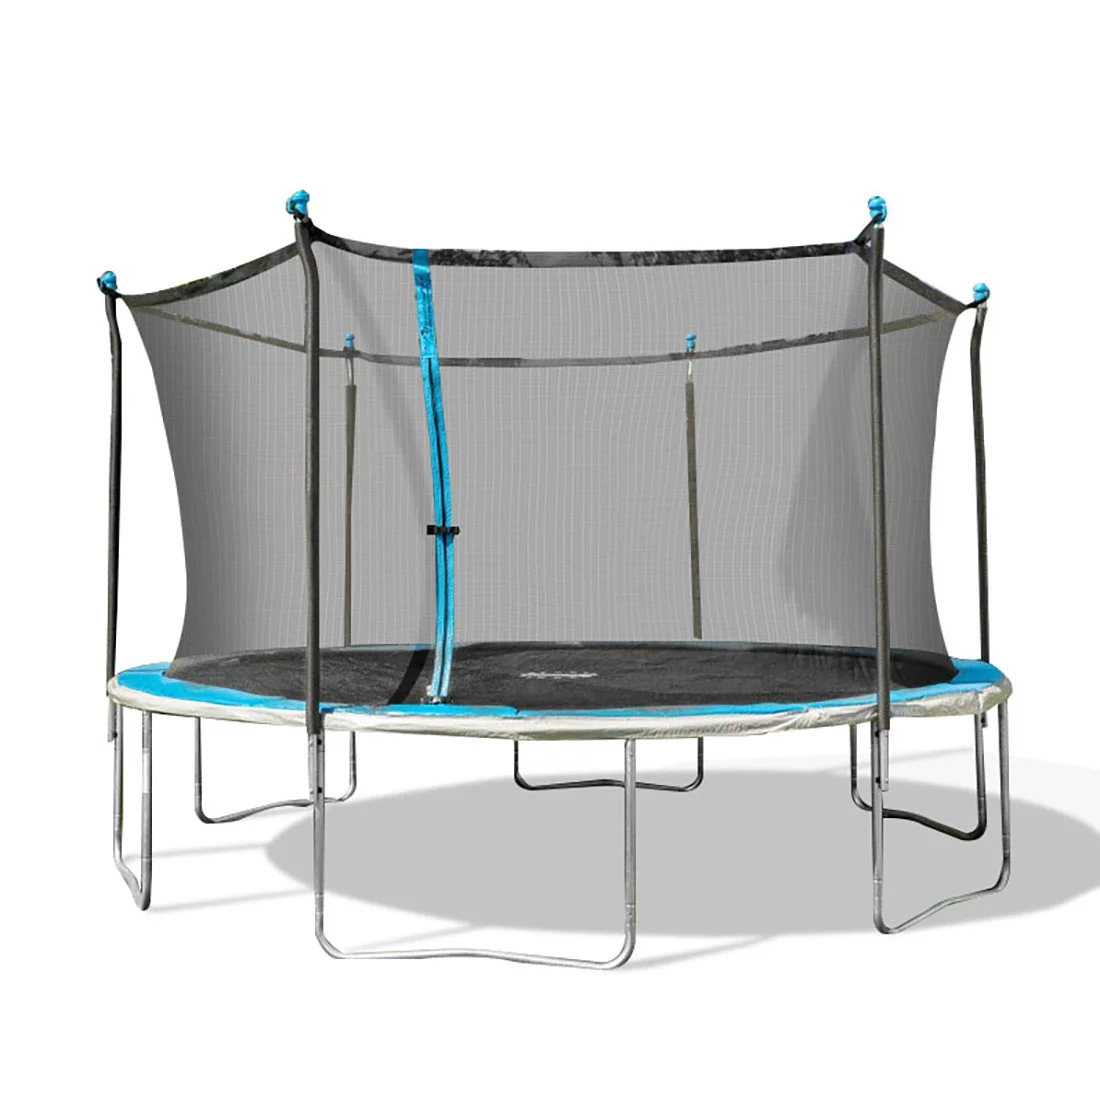 Bounce Pro 14ft Trampoline with Flash Lite Zone